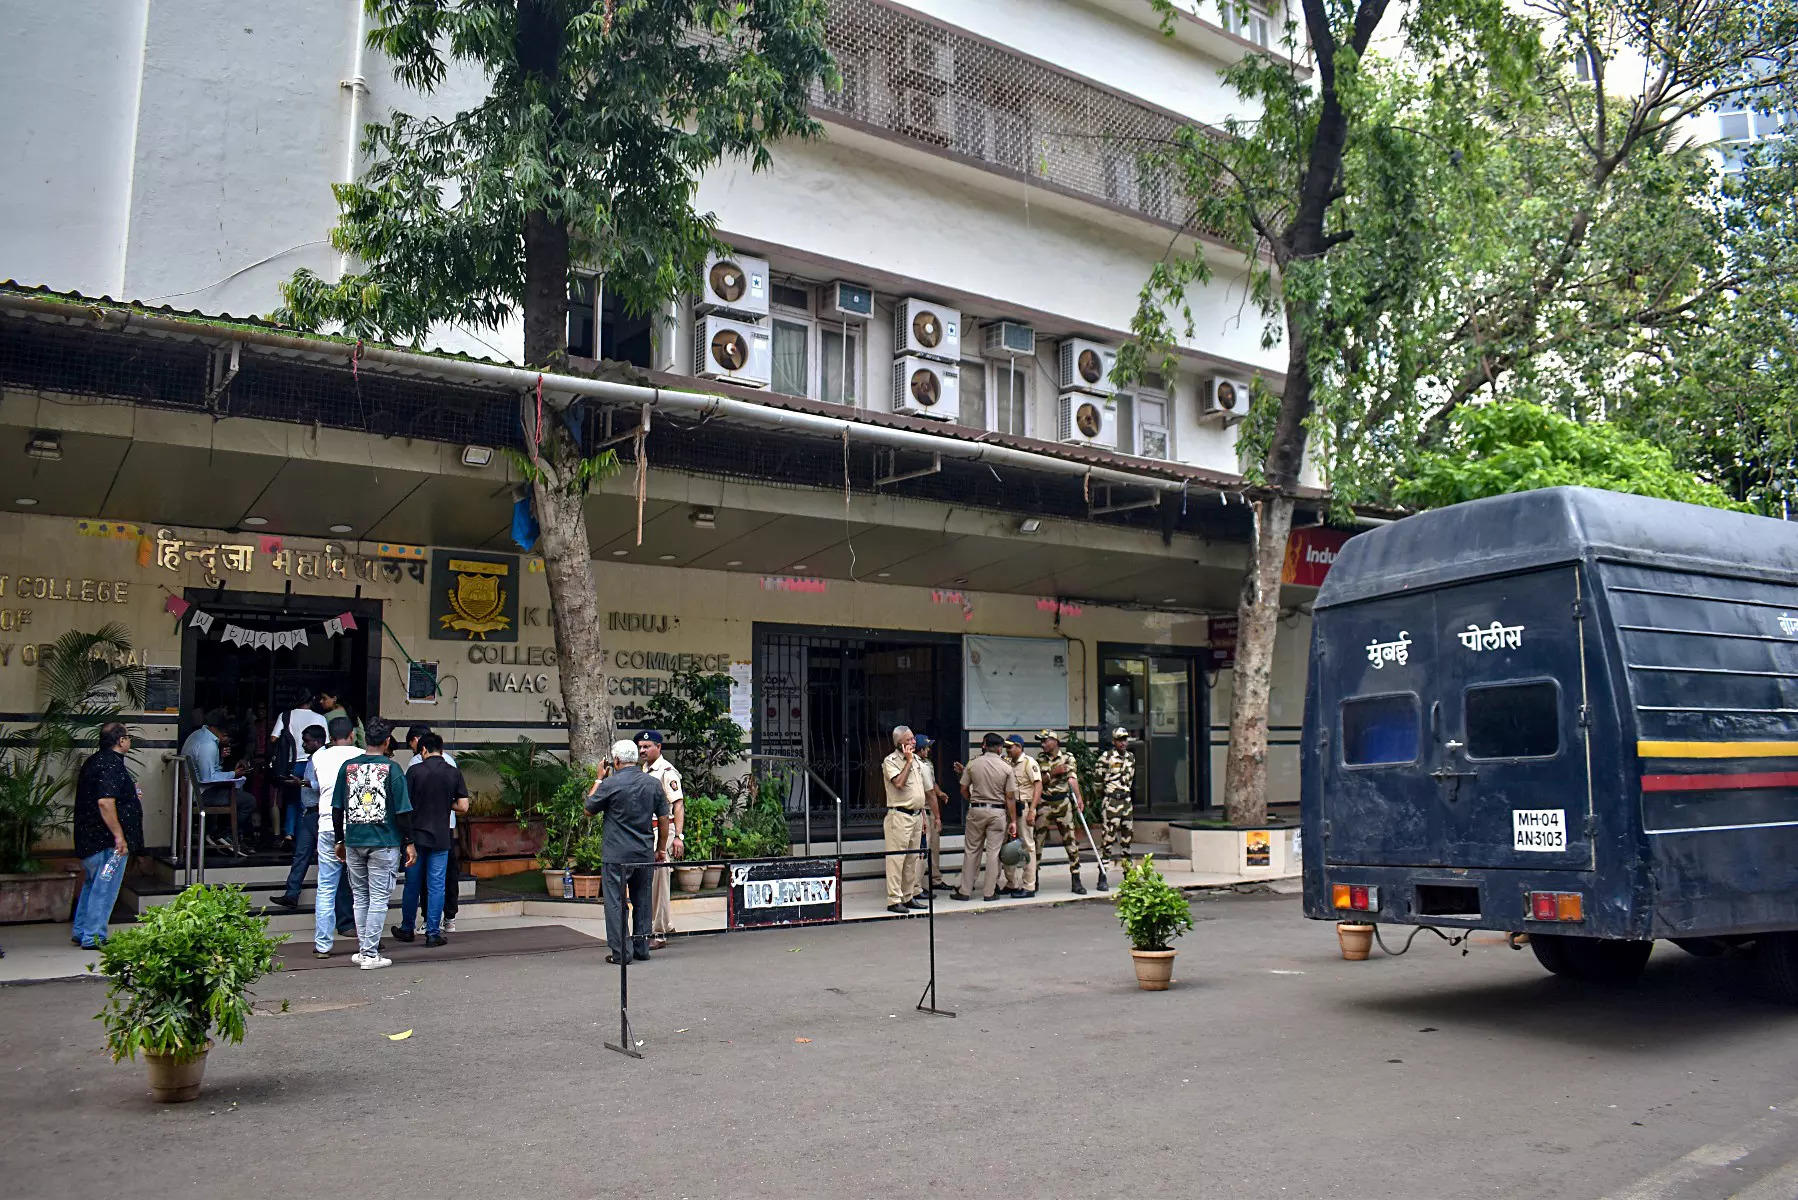 With airports, more than 50 hospitals in Mumbai including Jaslok Hospital receive bomb threats 